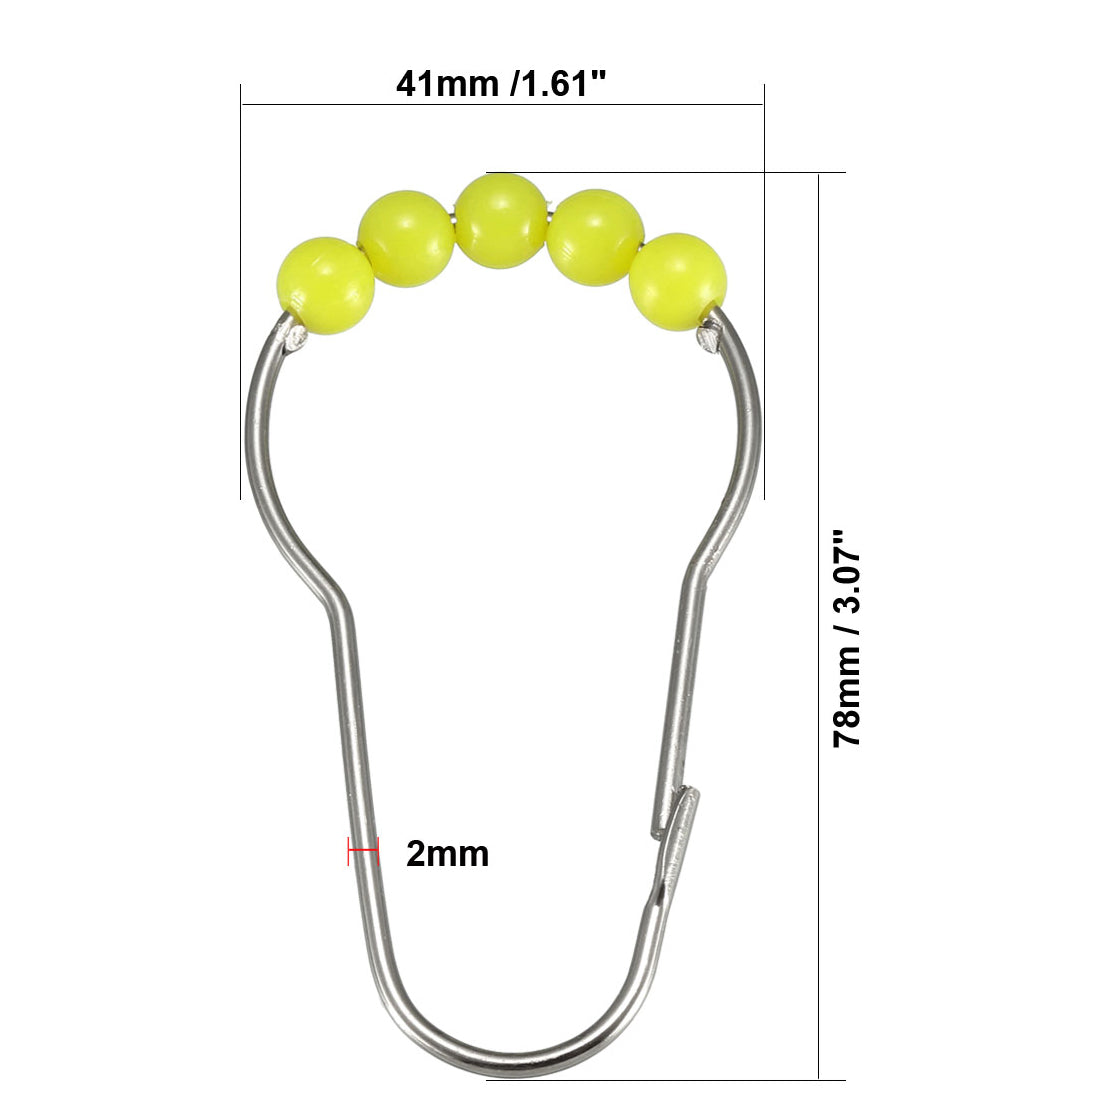 uxcell Uxcell Shower Curtain Ring Hooks Metal for Bathroom Shower Rods Curtains Liners Yellow Ball 6 Pcs